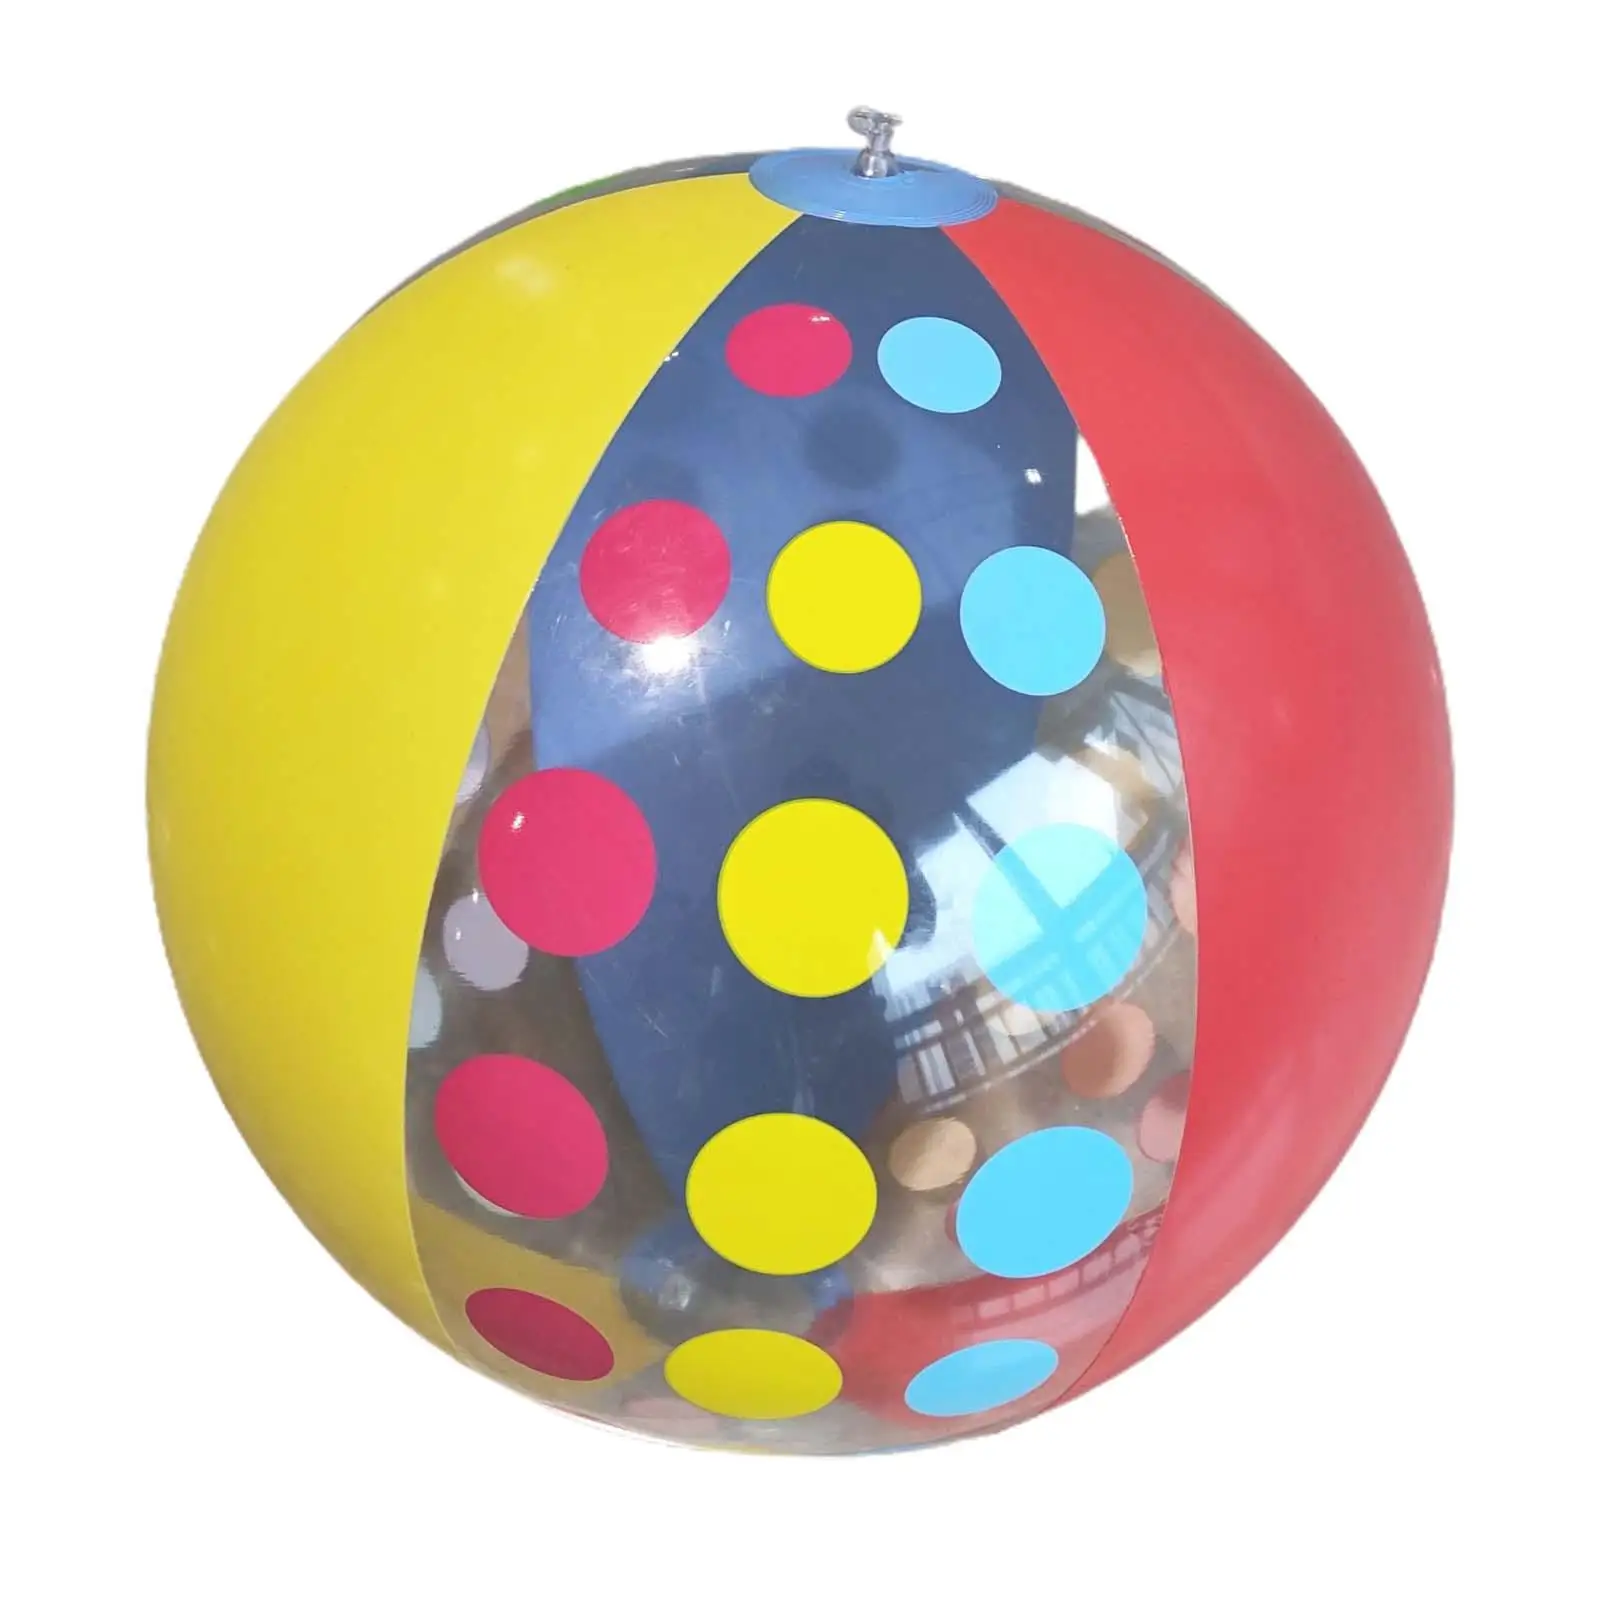 Summer Beach Ball Pool Game 15.75`` Party Favor Leakproof Inflatable Pool Toys Blow Balls for Holiday Party Lake Summer Yard